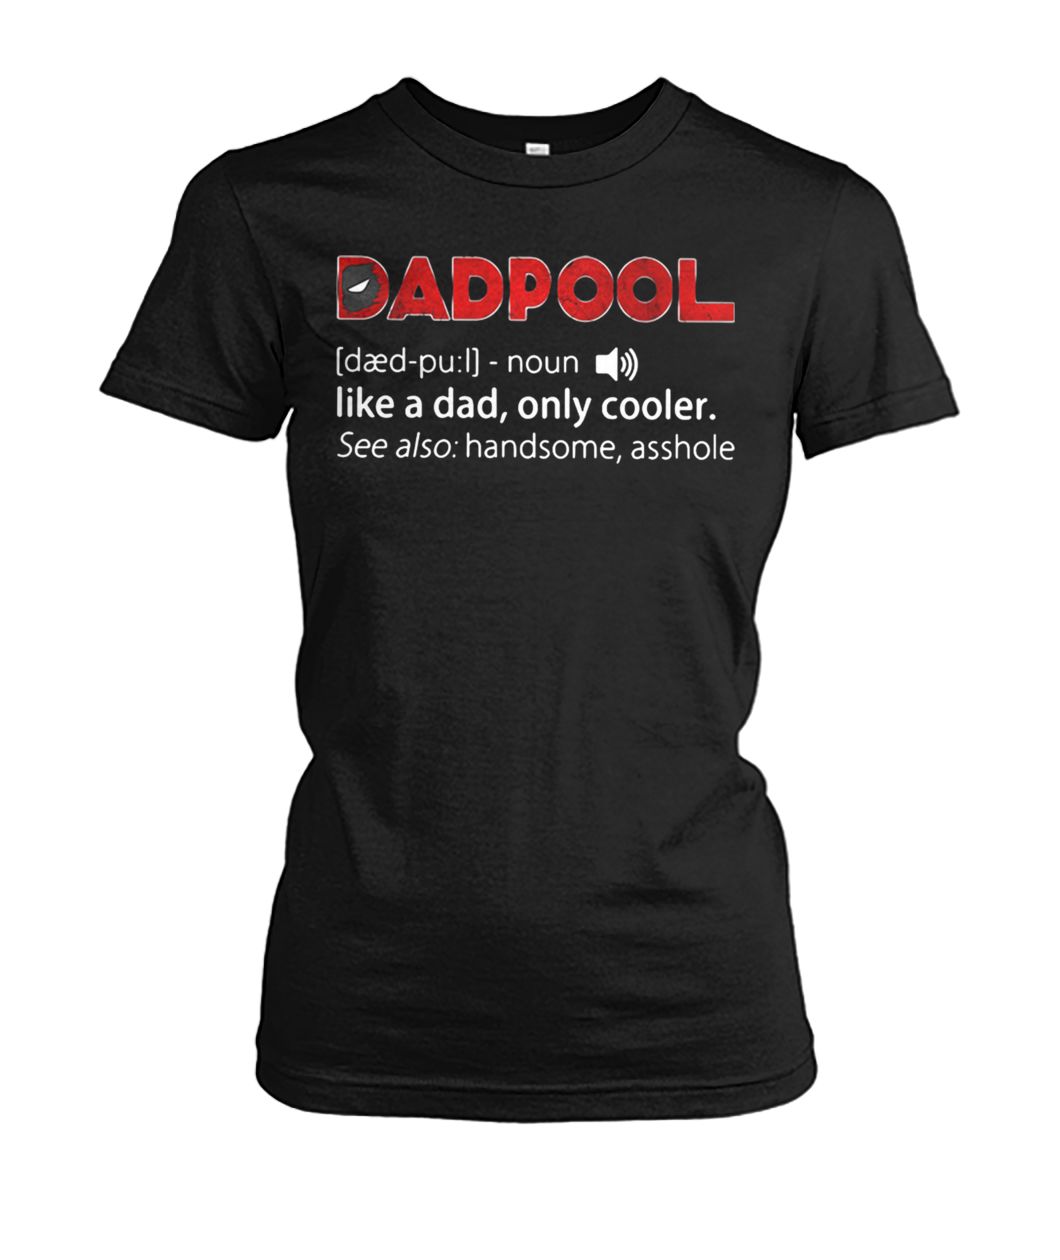 Dadpool definition meaning like a dad only cooler see also handsome asshole women's crew tee